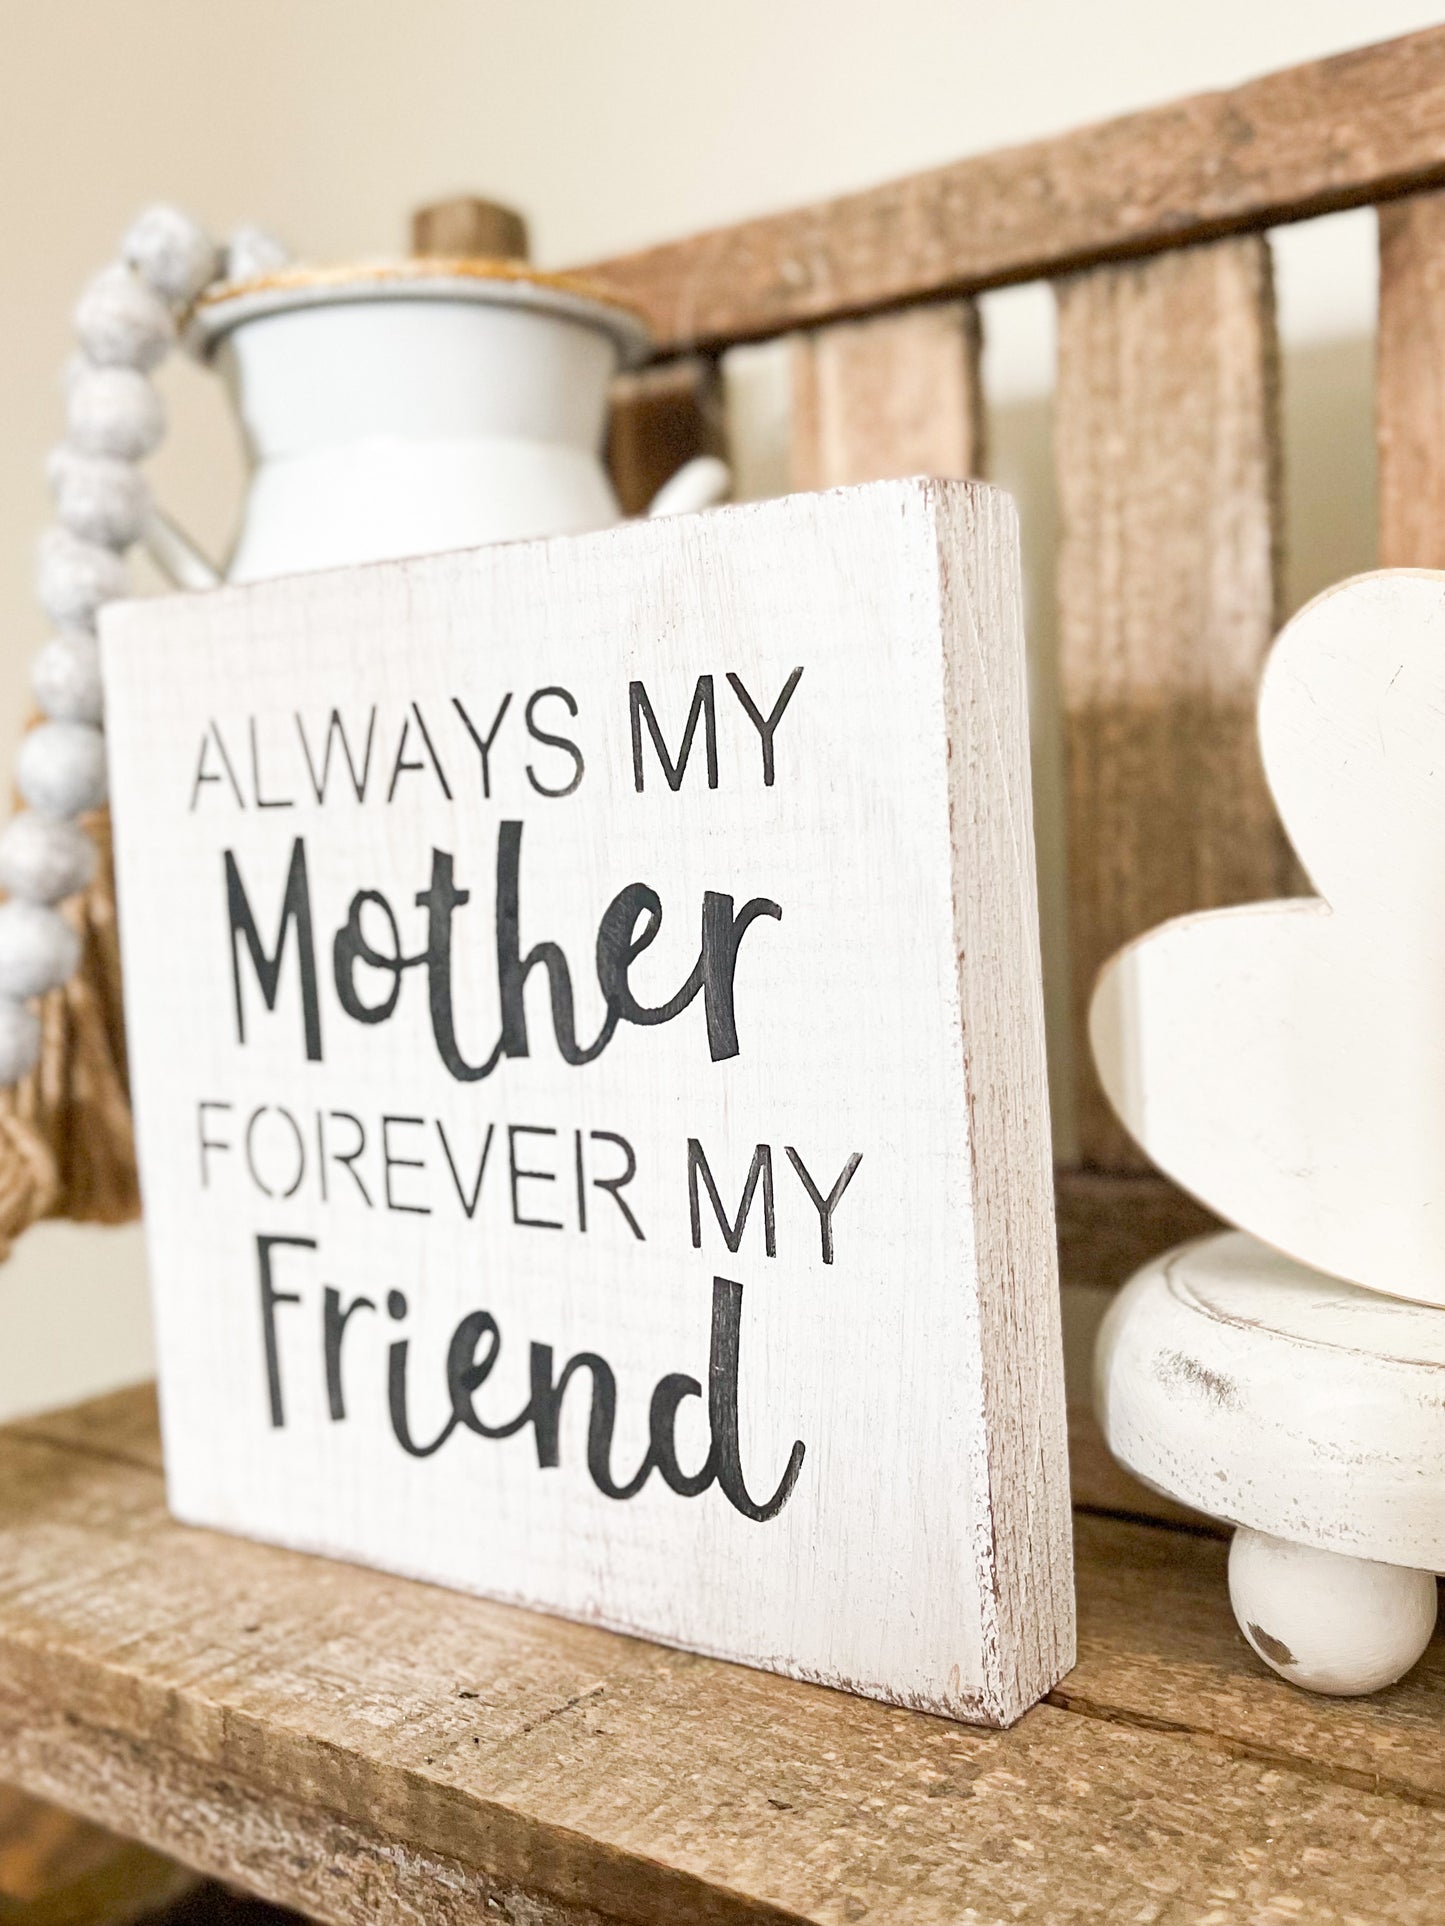 Always my mother forever my friend sign